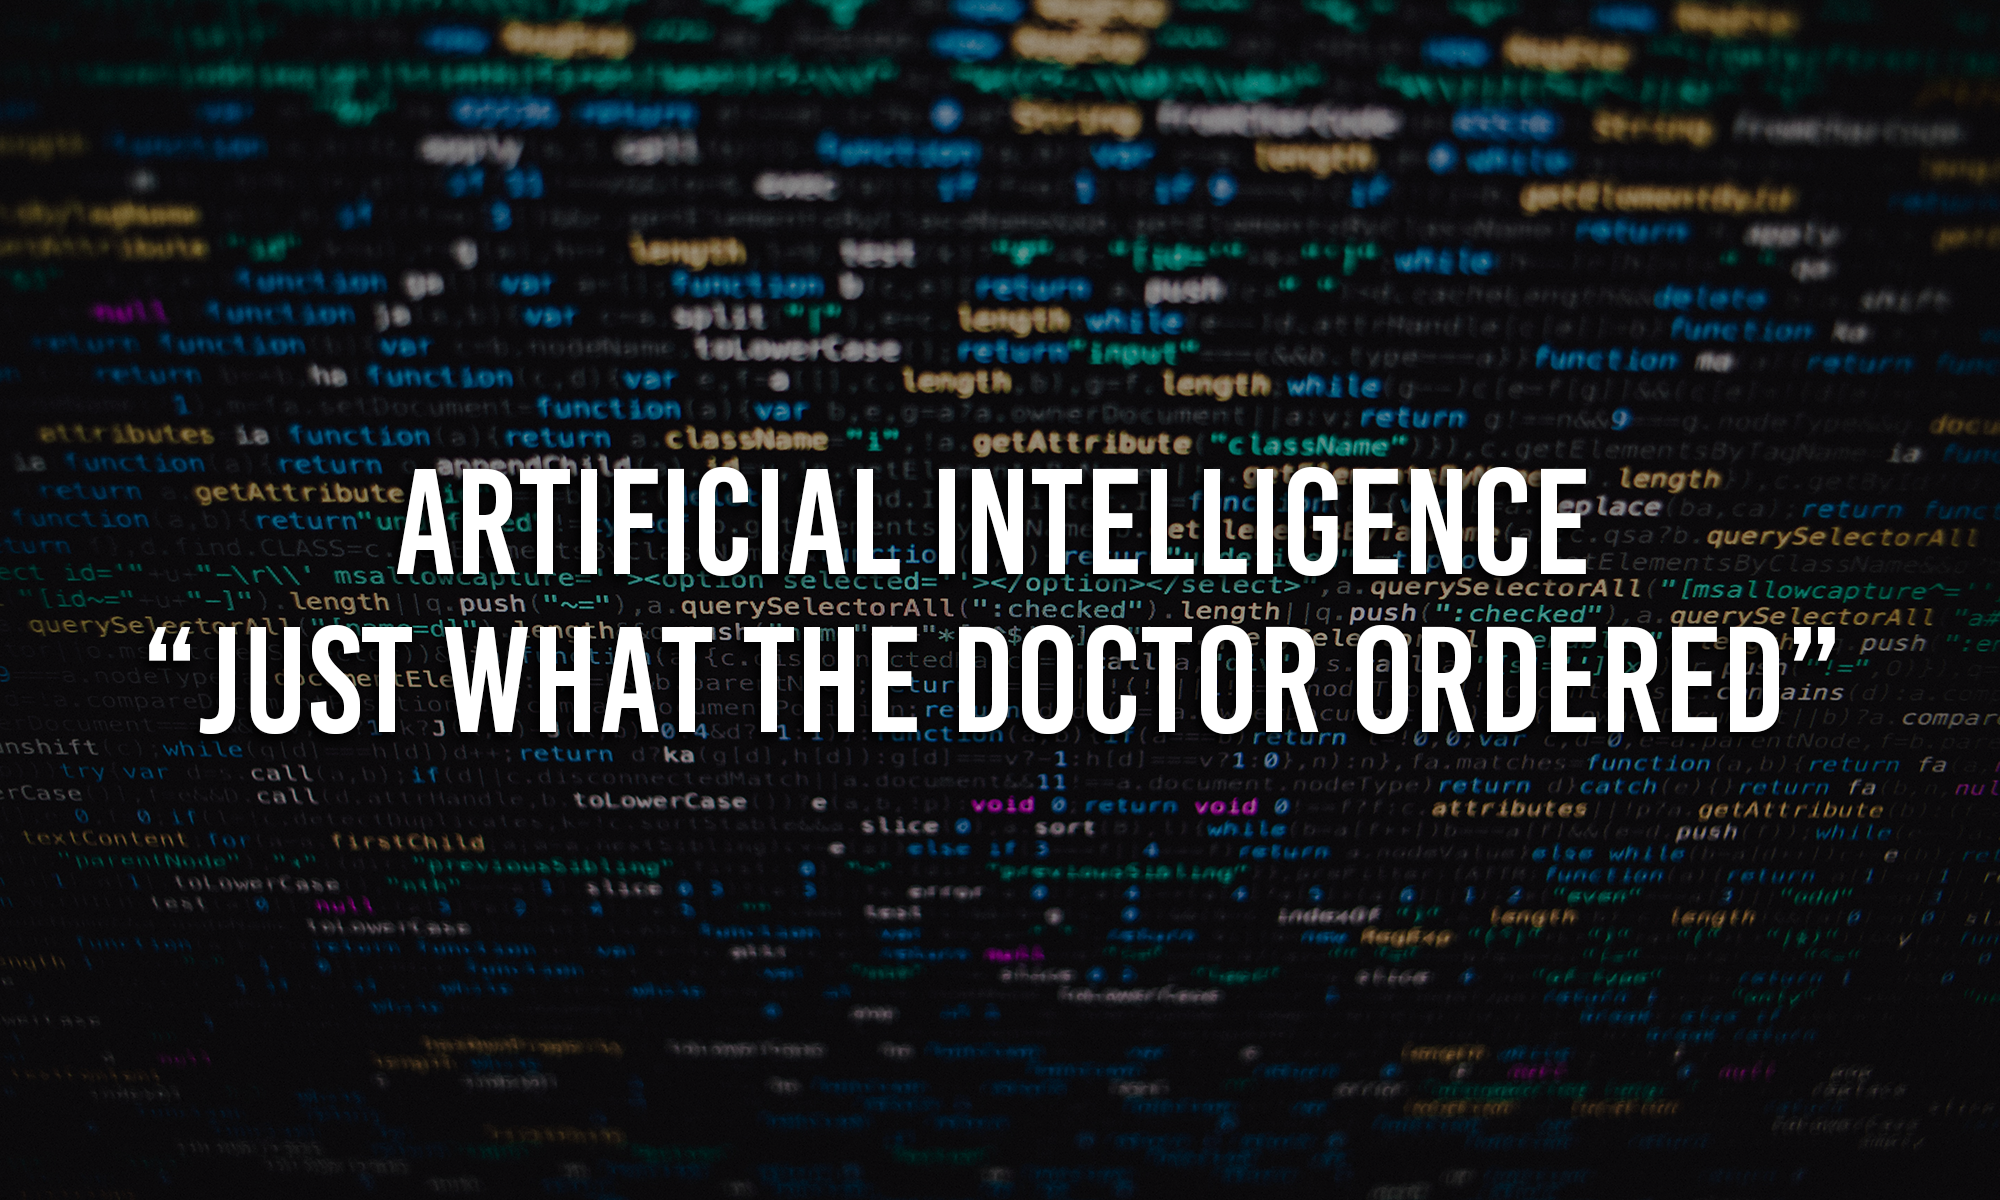 Artifical Intelligence just what the doctor ordered